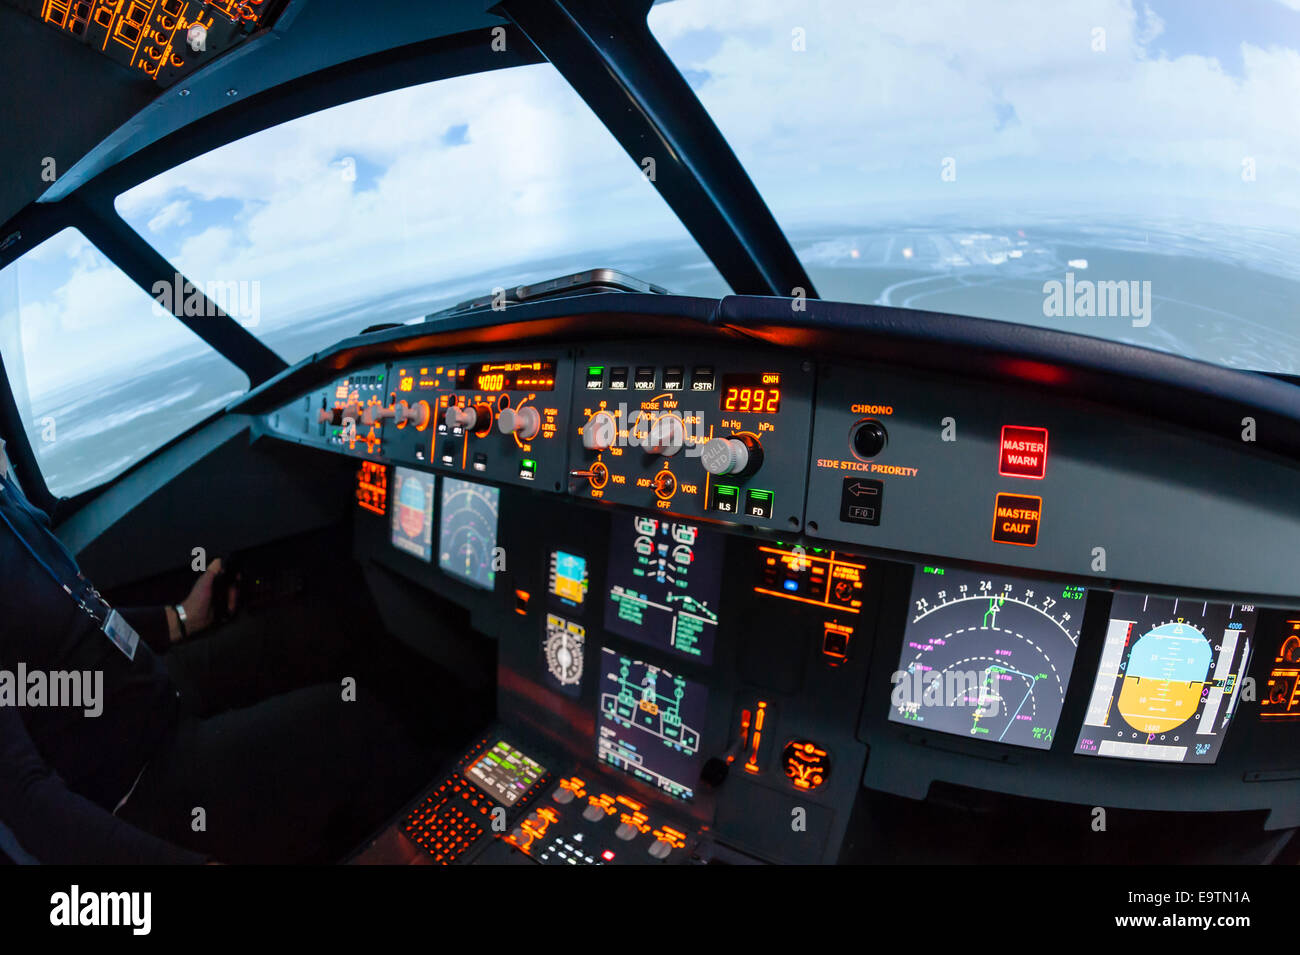 Cockpit Of An Airbus A320 Flight Simulator That Is Used For